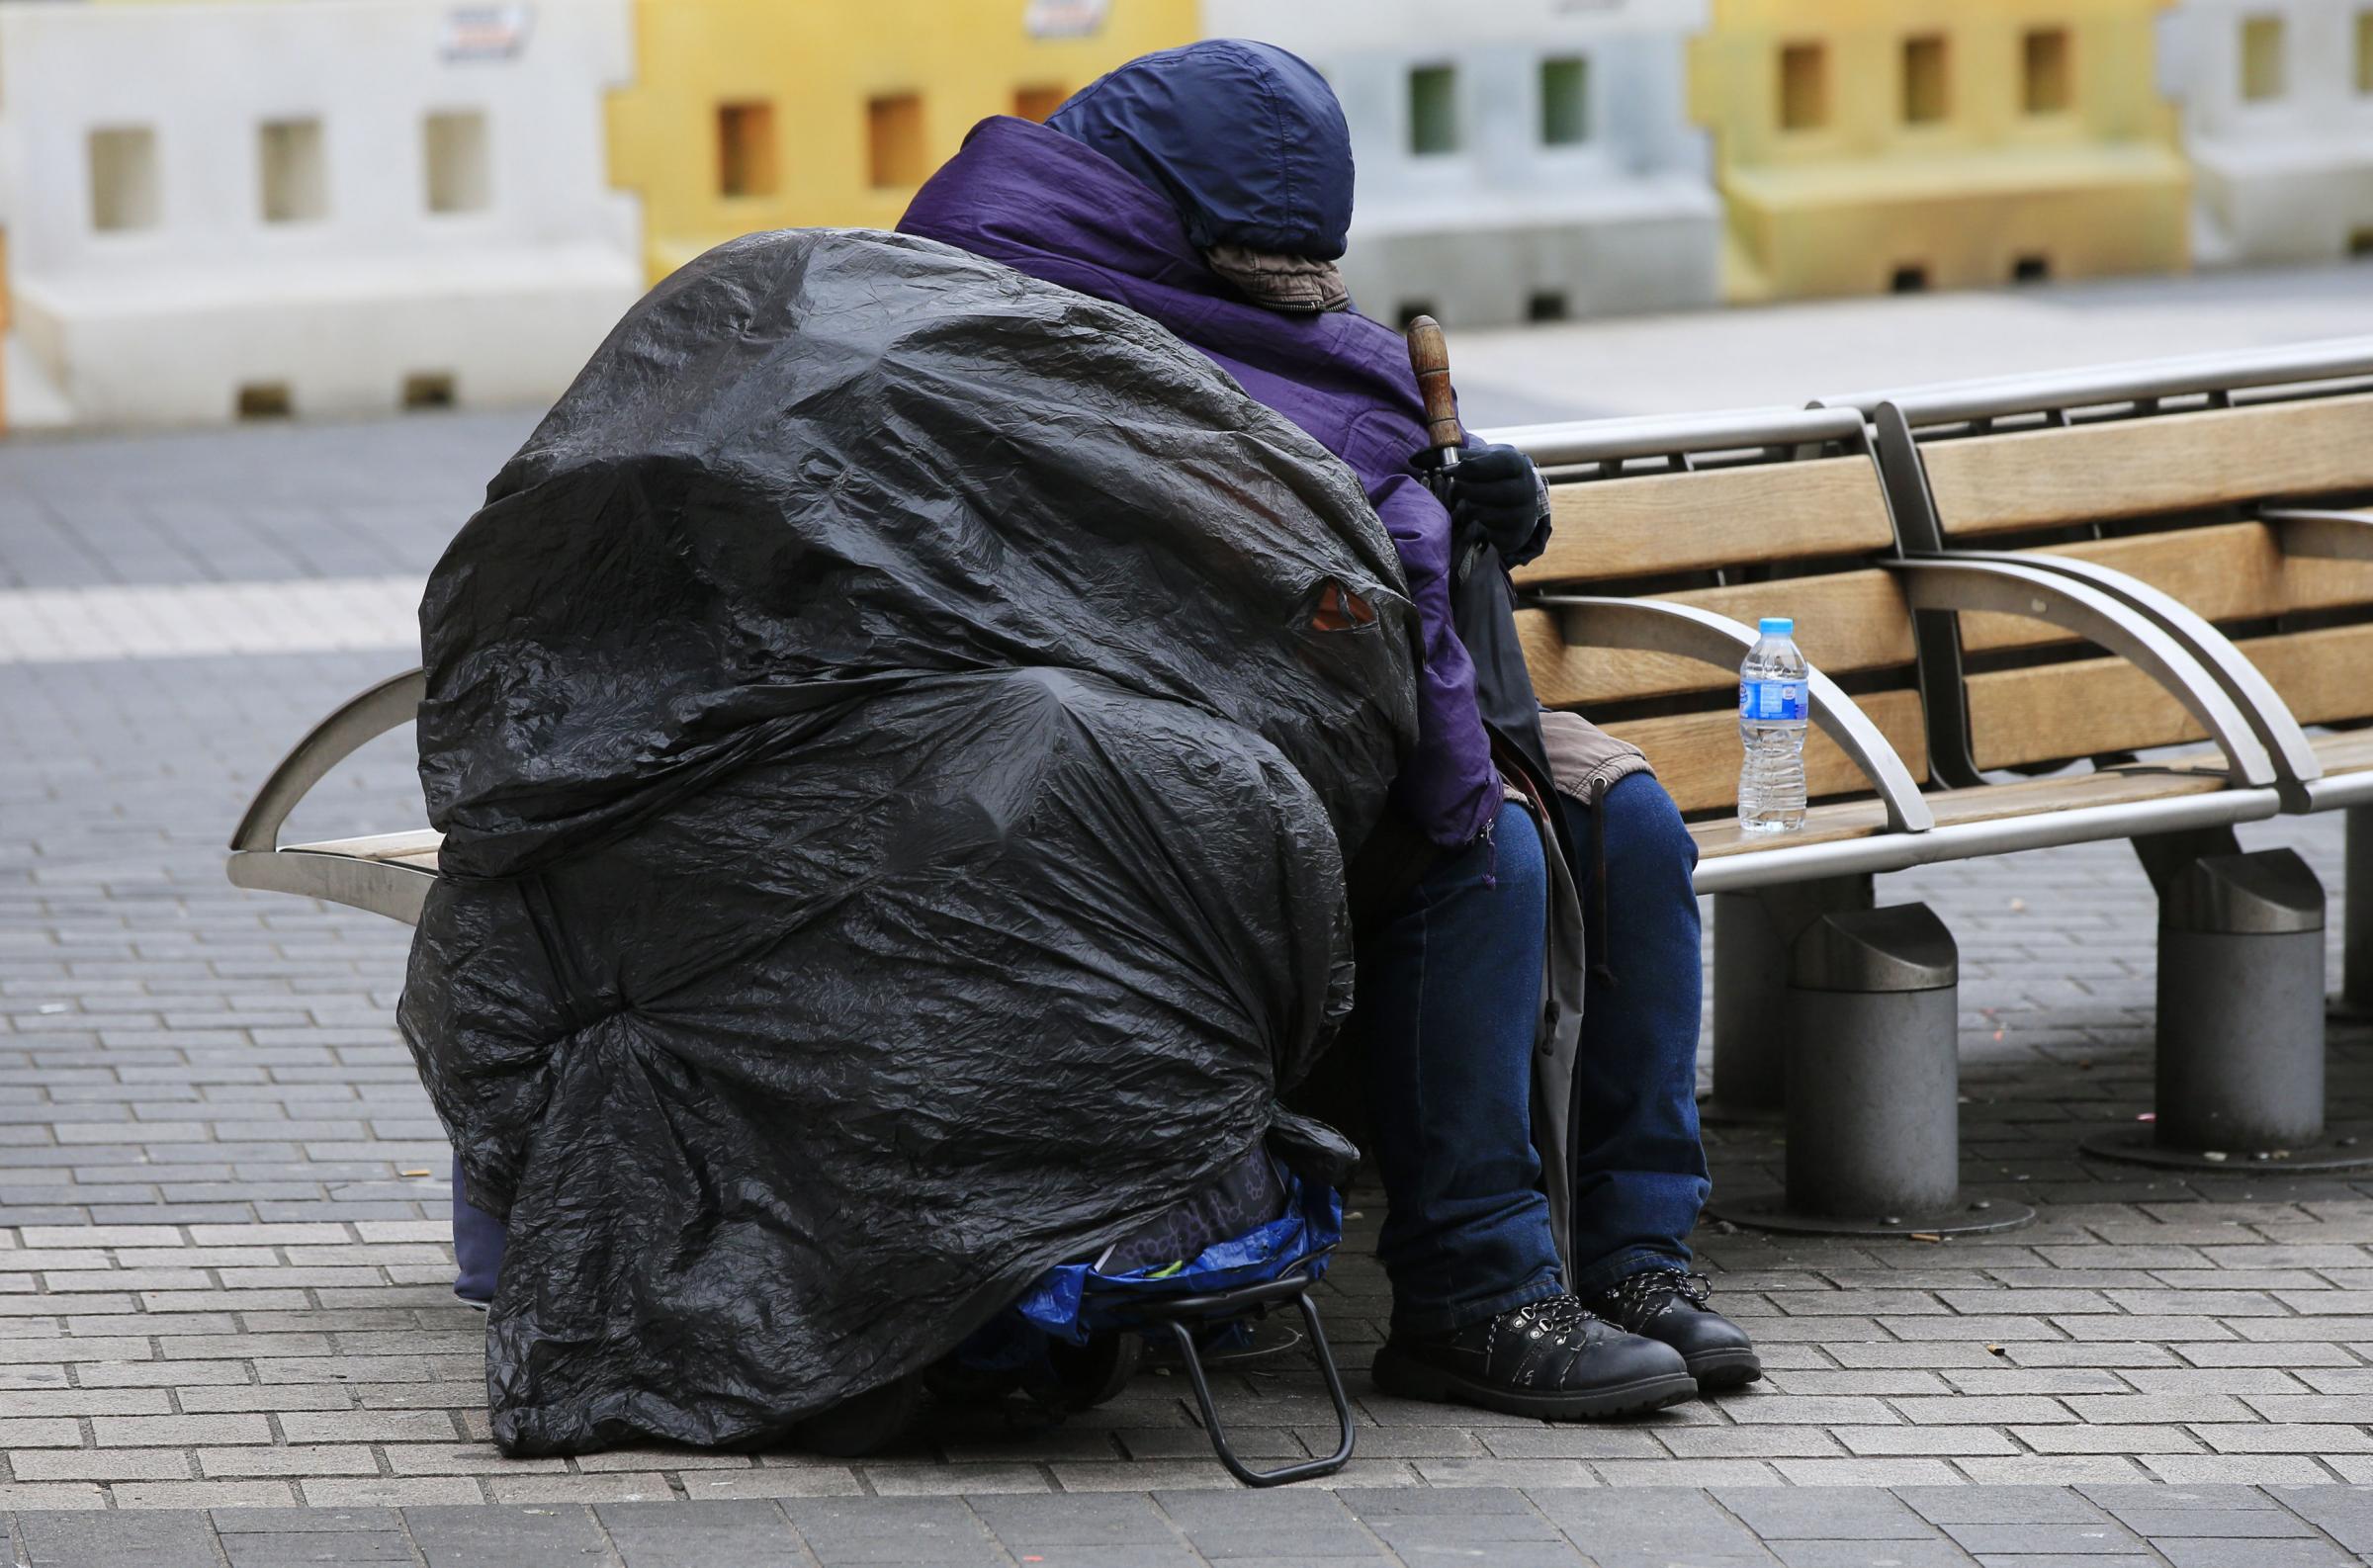 One in 69 people in Brighton and Hove is homeless